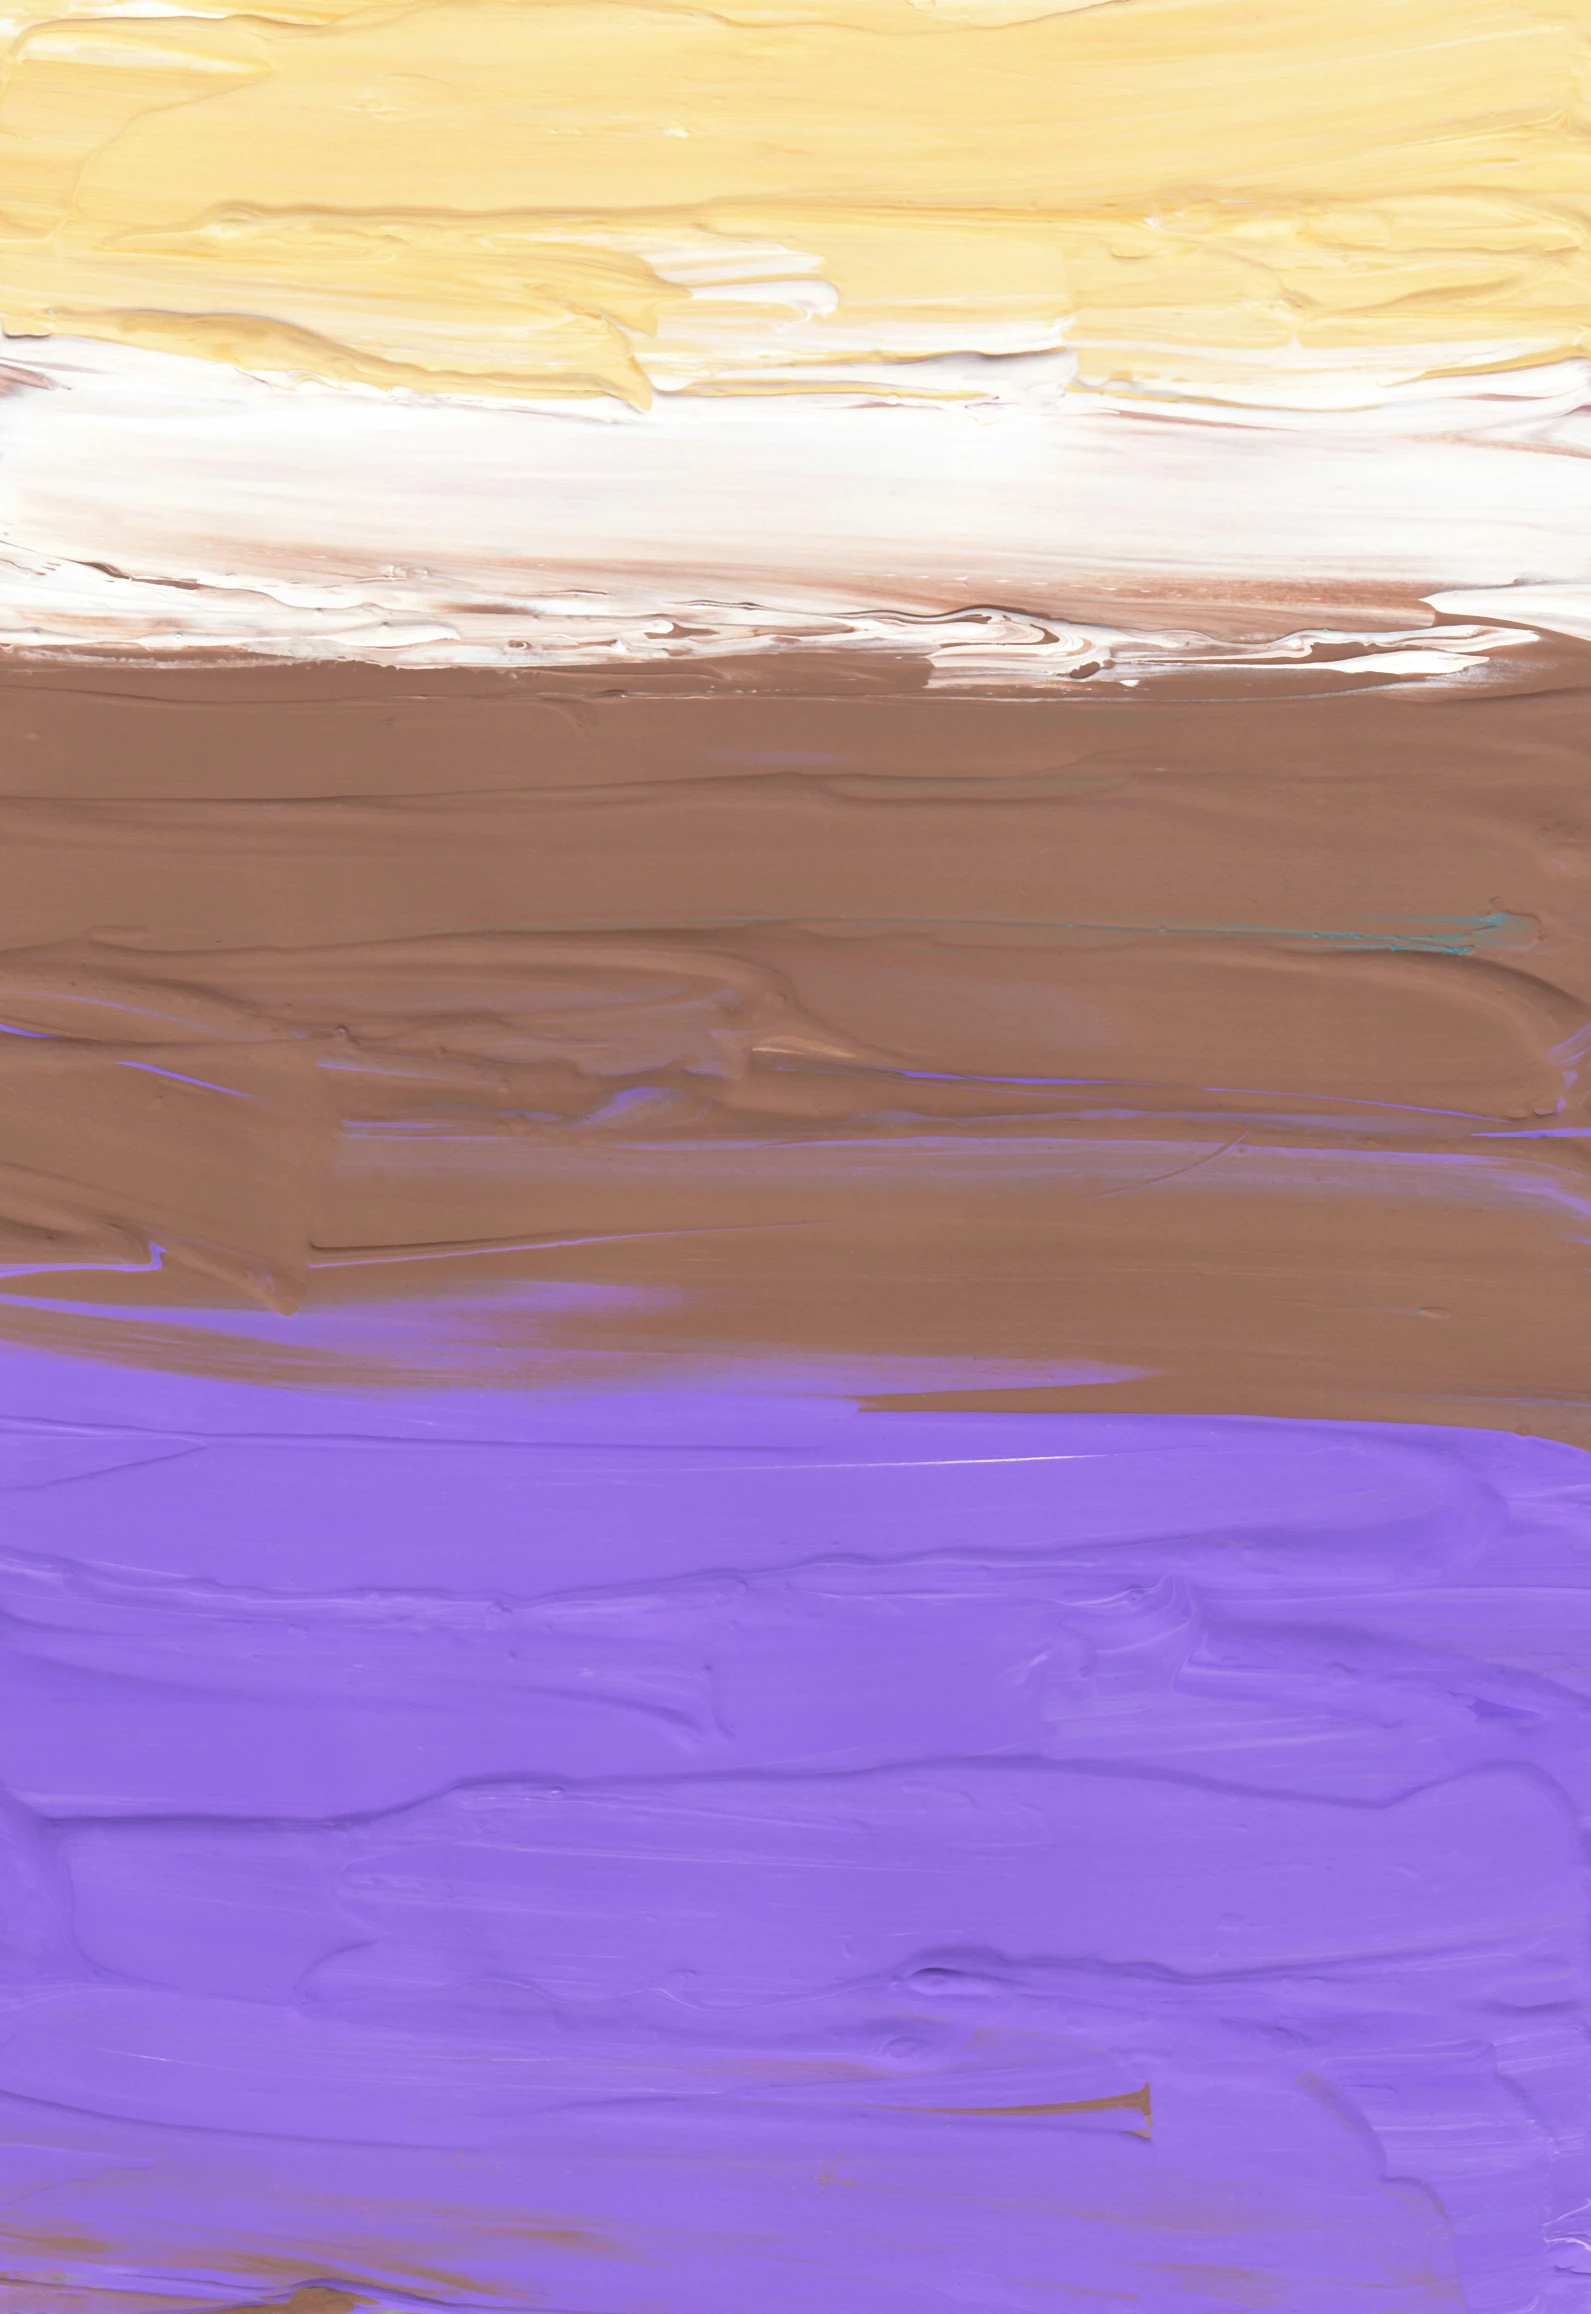 a painting that has different shades of purple and brown